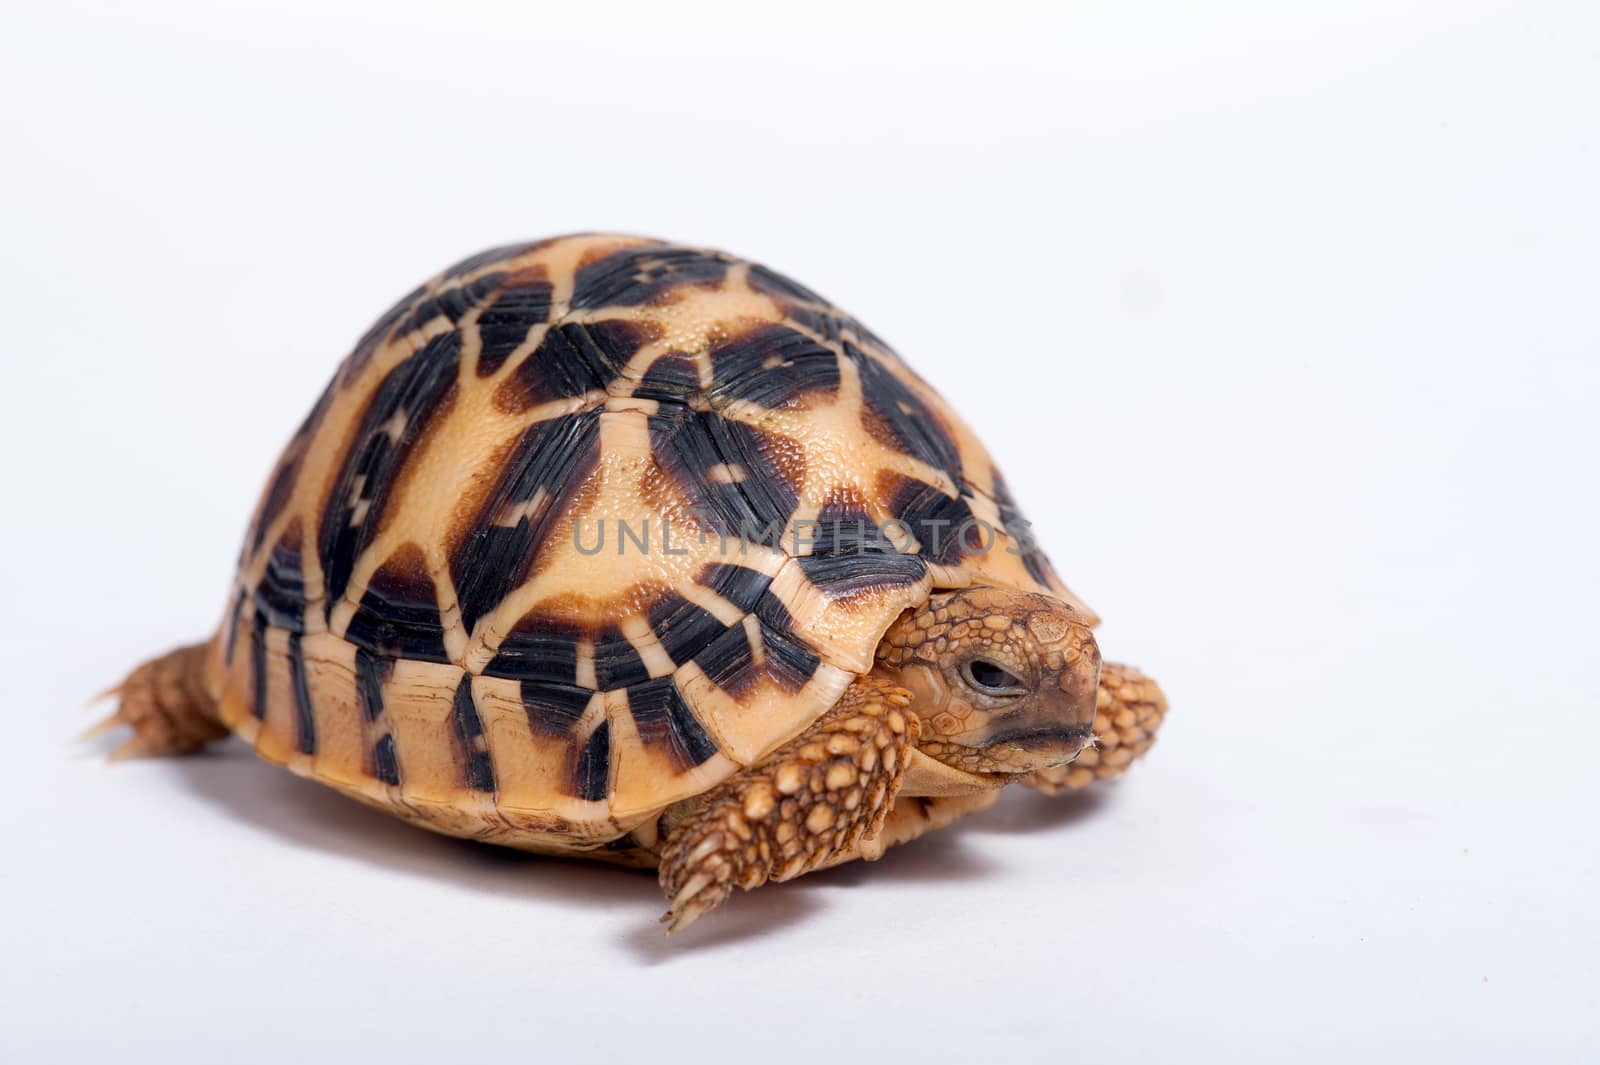 Indian Star Tortoise (Geochelone elegans) isolated on white back by think4photop